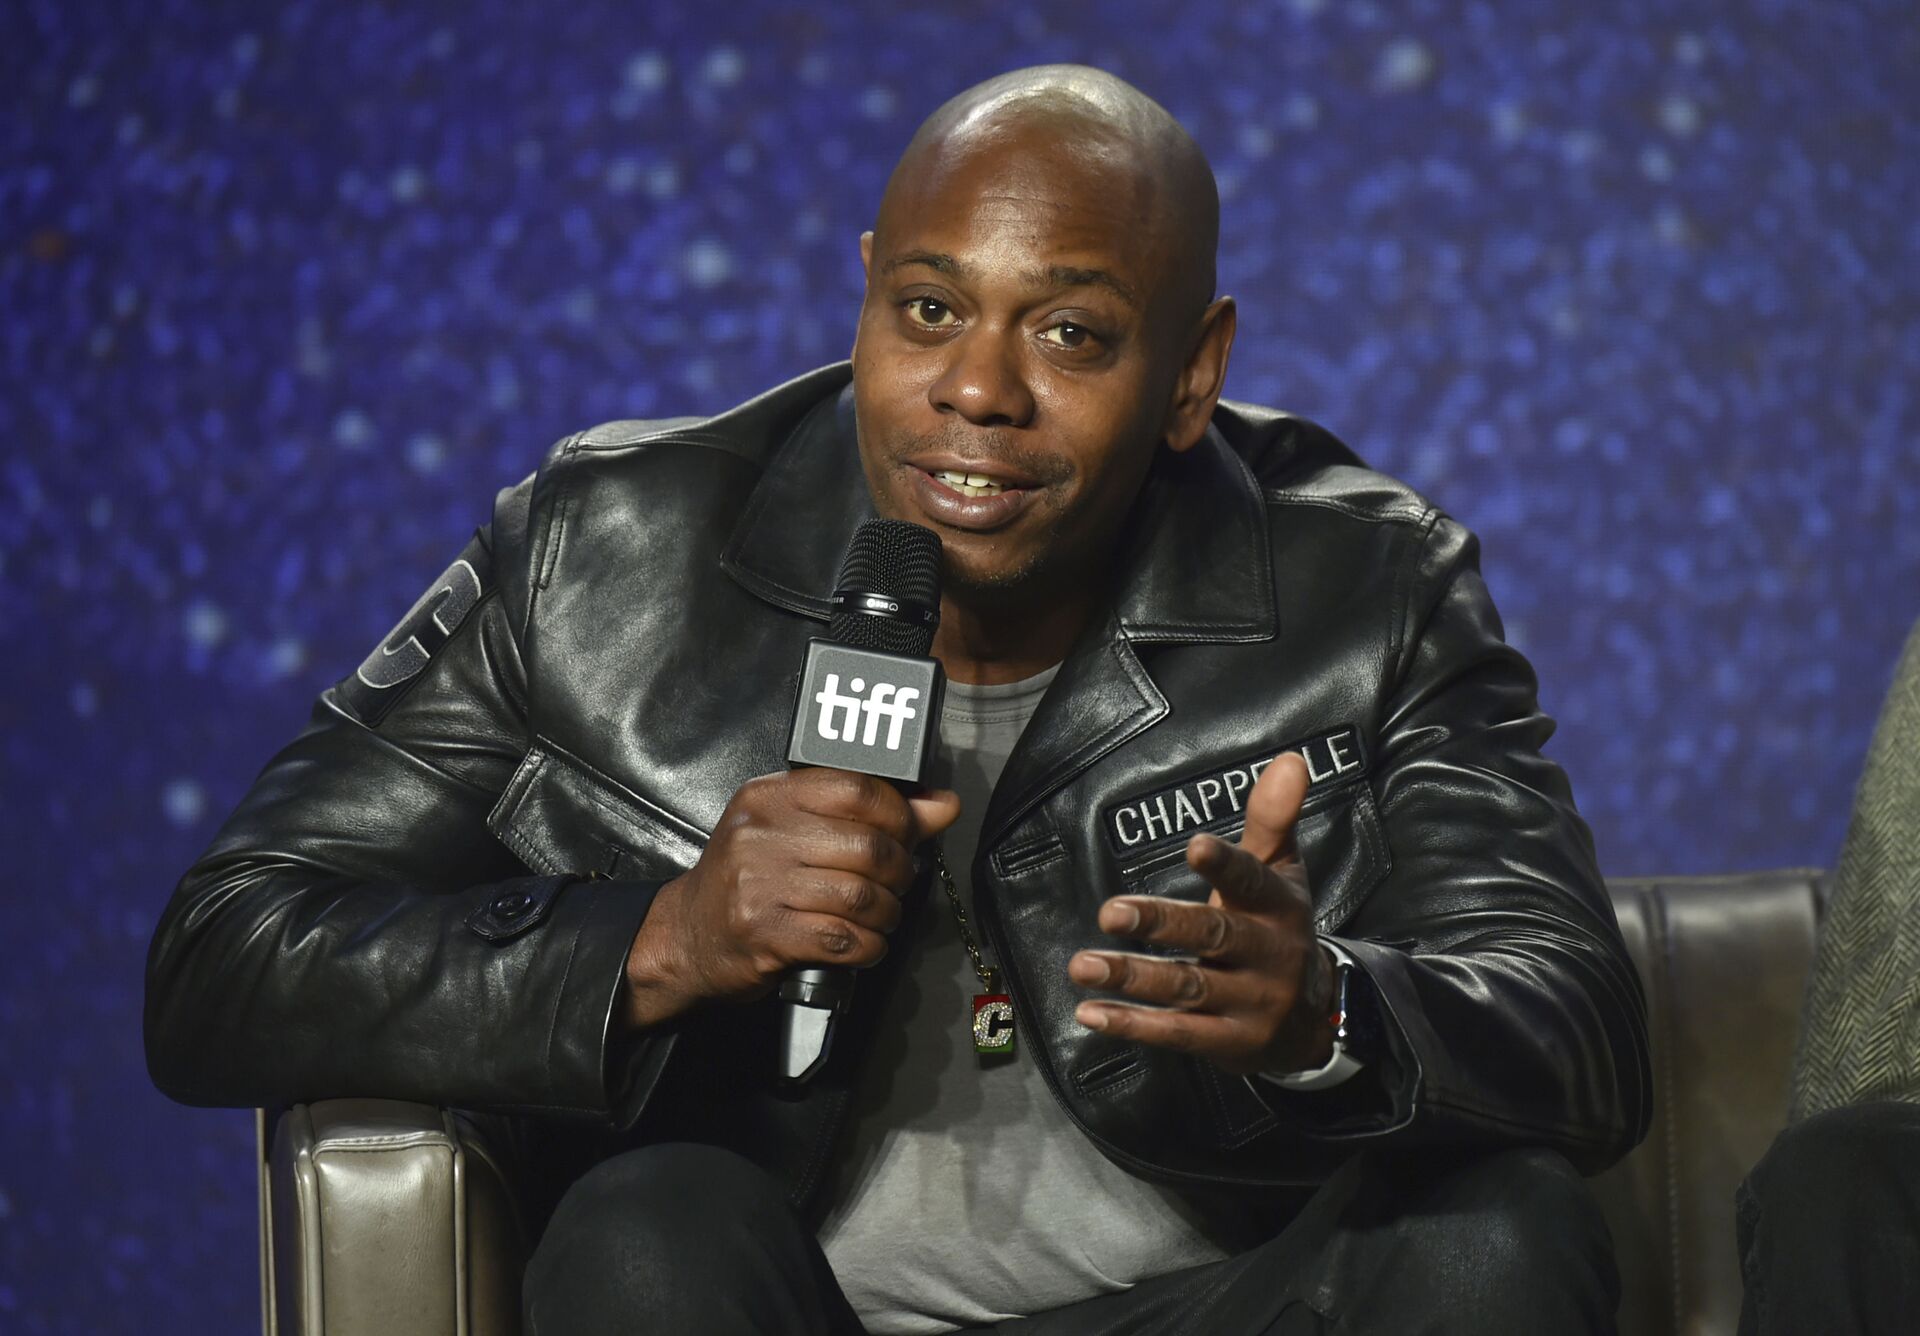 Dave Chappelle speaks at the press conference for A Star Is Born on day 4 of the Toronto International Film Festival at the TIFF Bell Lightbox on Sunday, Sept. 9, 2018, in Toronto.  - Sputnik International, 1920, 14.10.2021